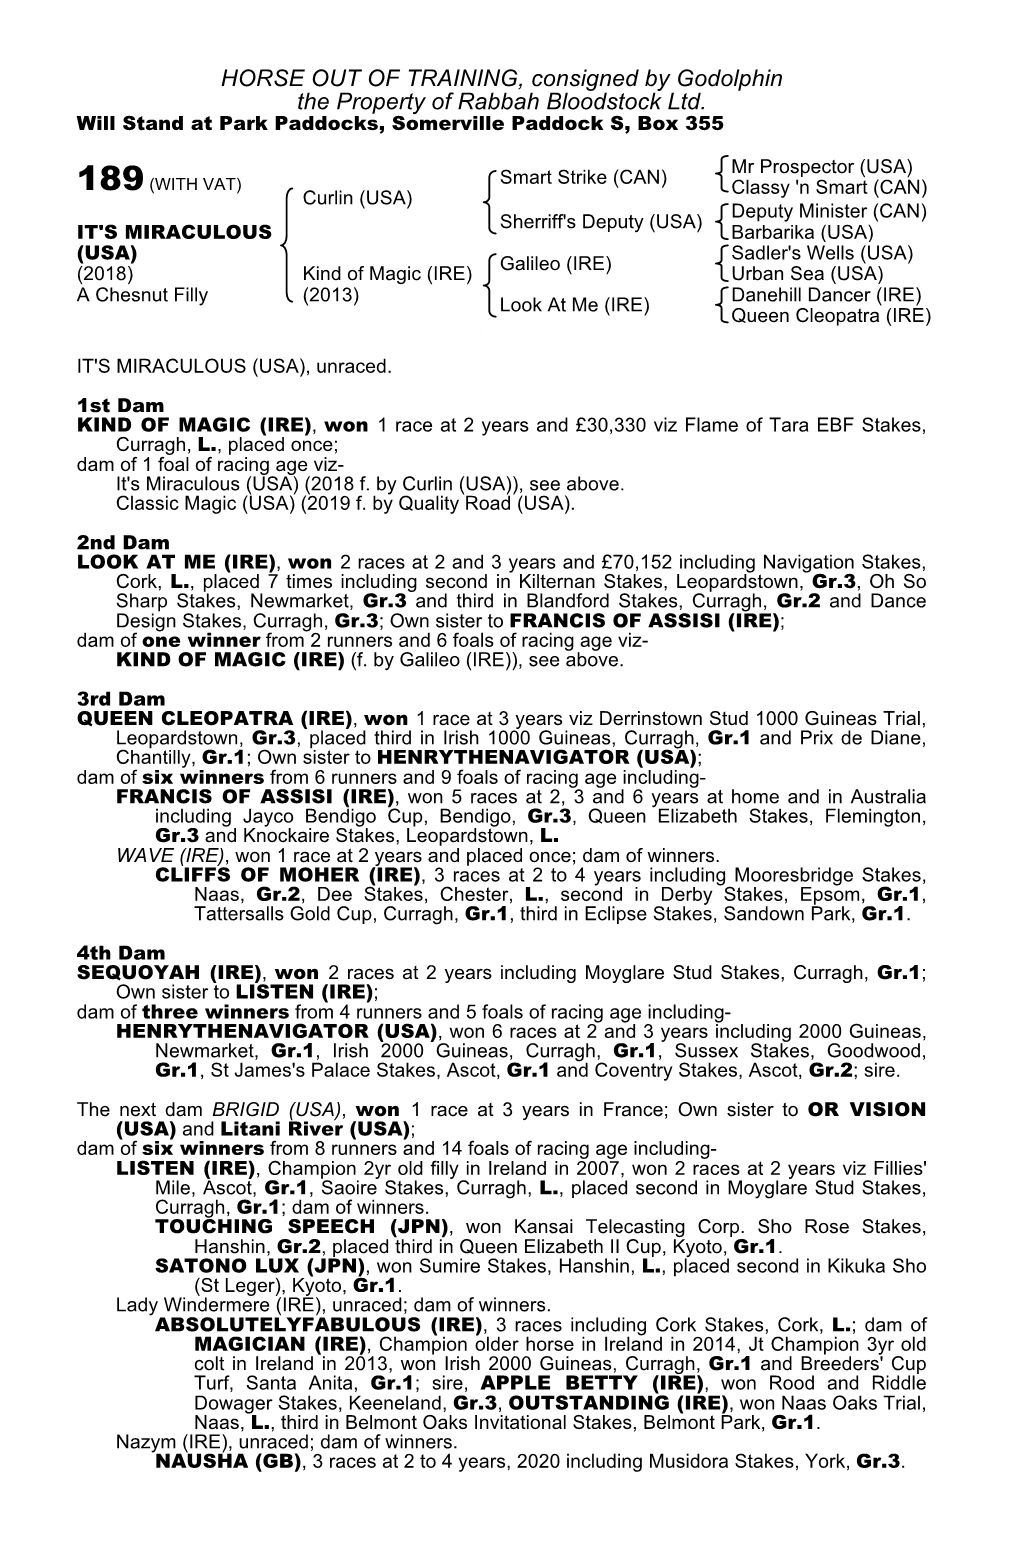 HORSE out of TRAINING, Consigned by Godolphin the Property of Rabbah Bloodstock Ltd